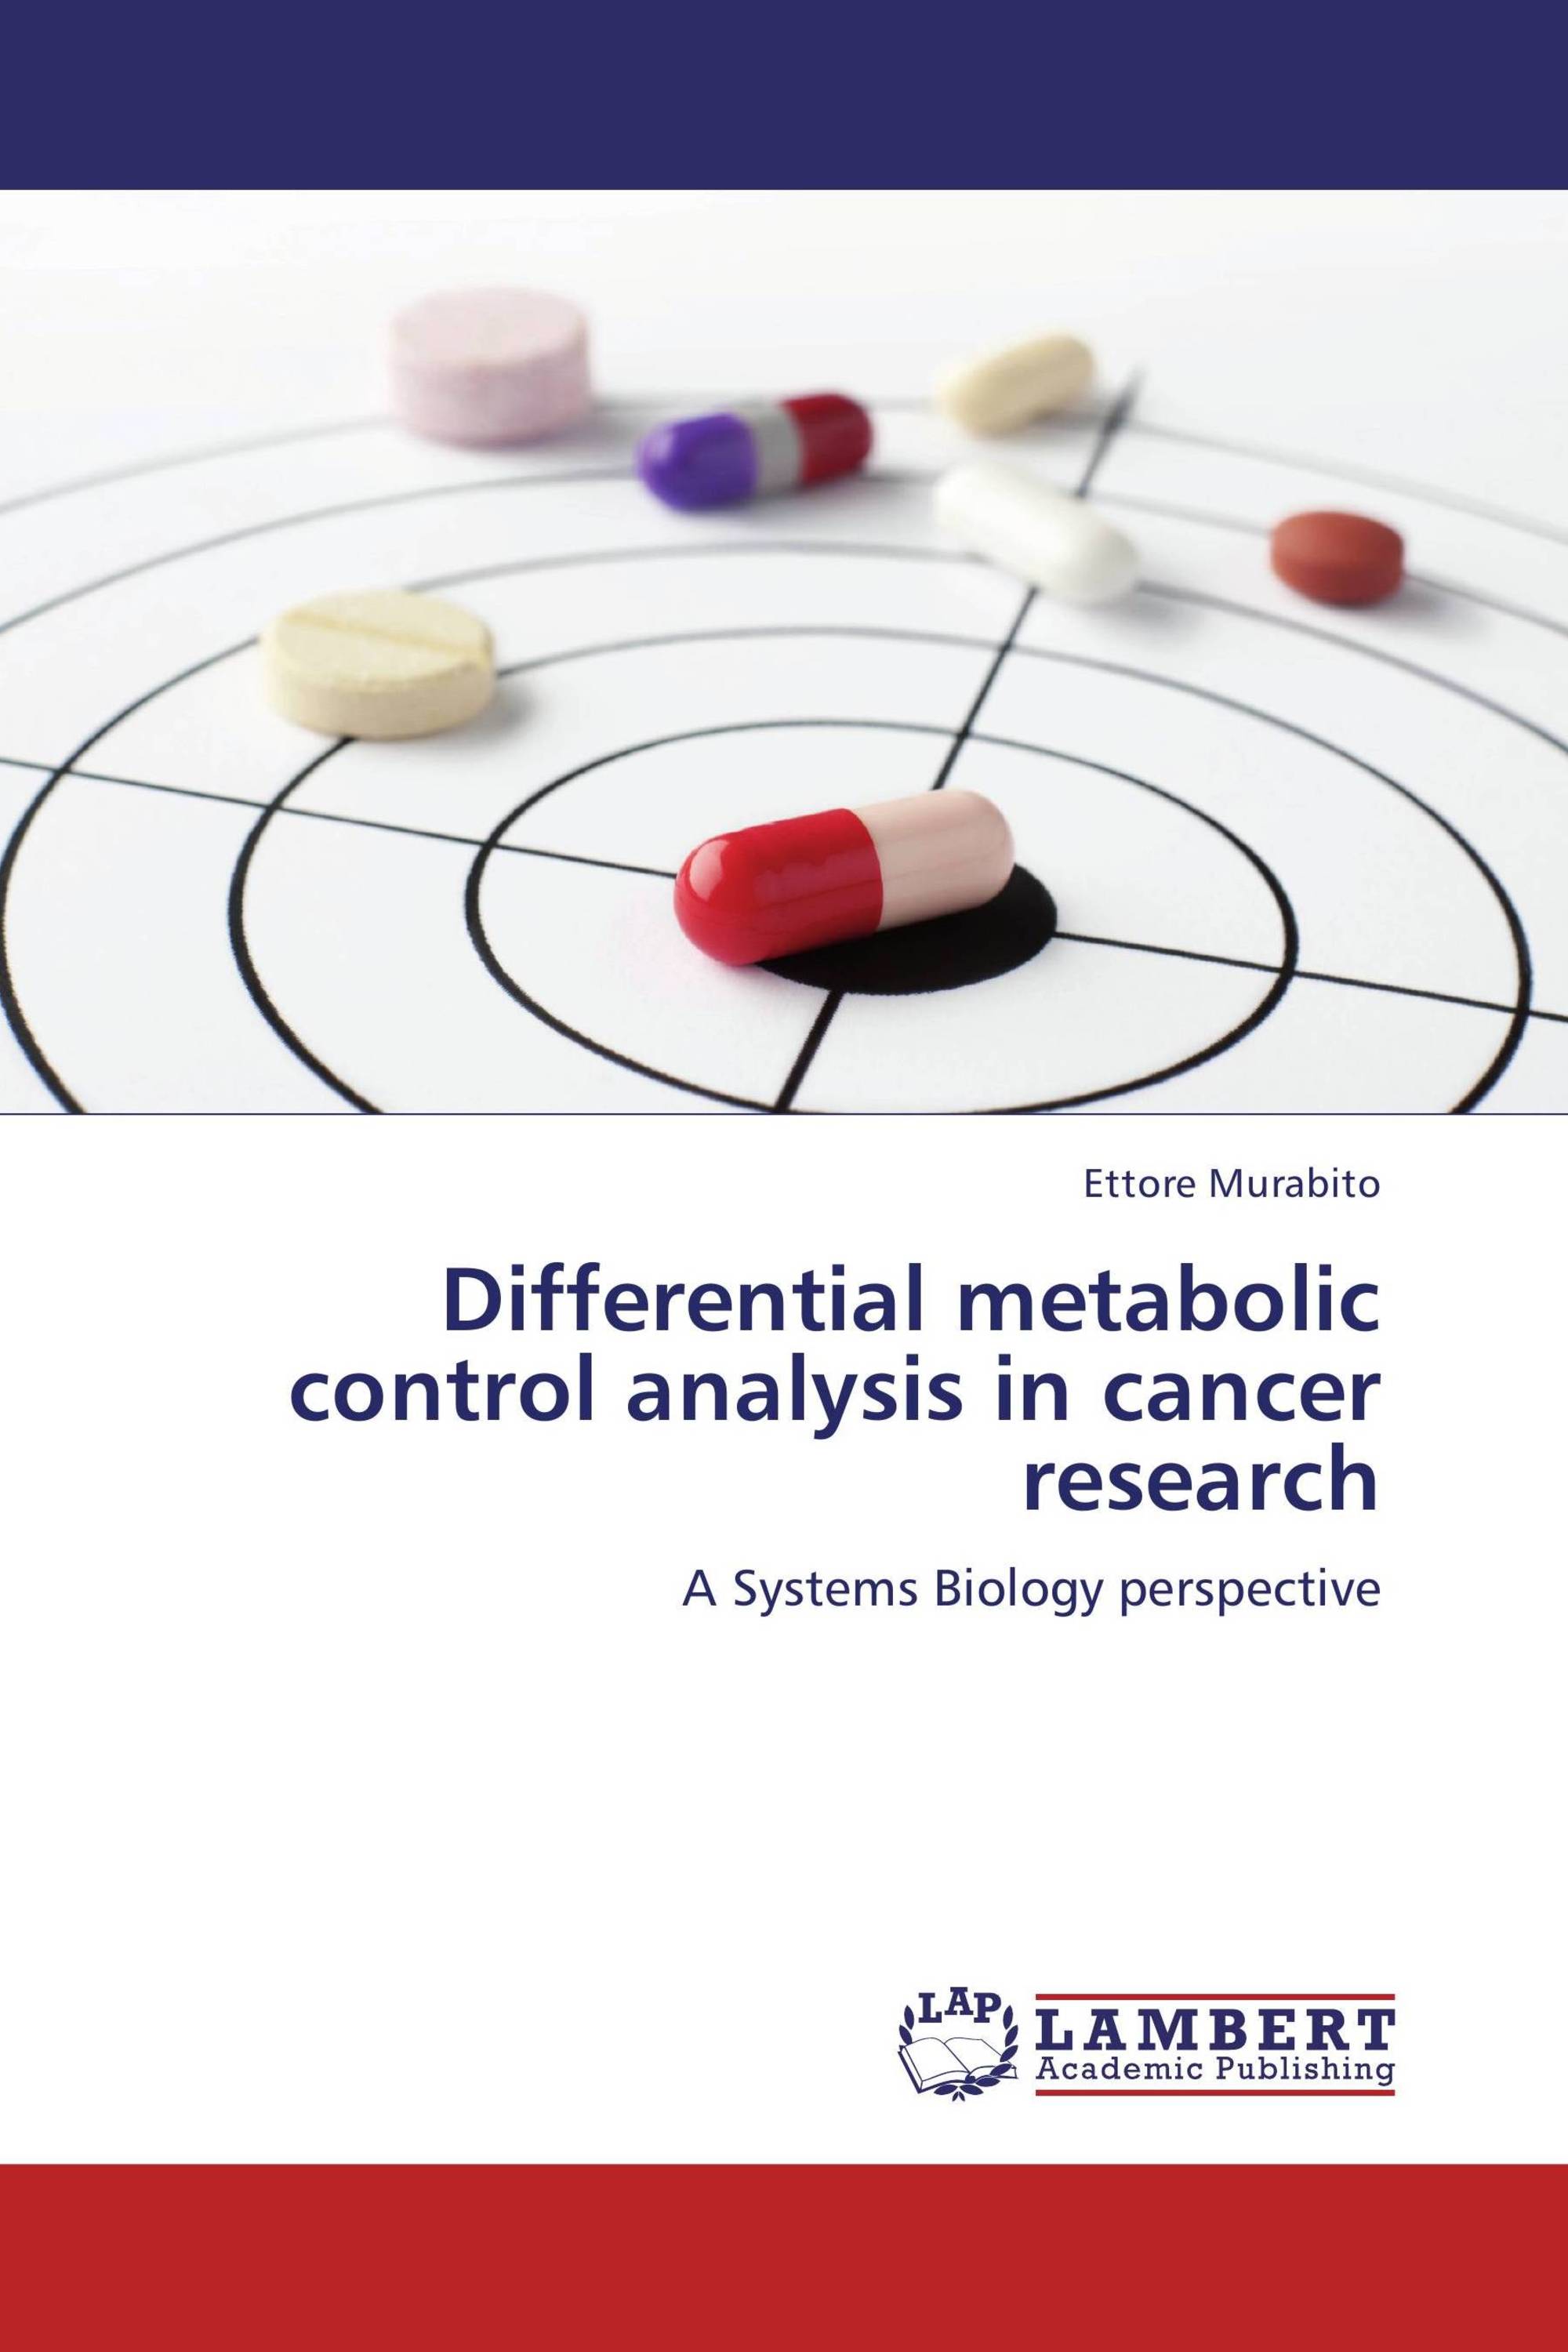 Differential metabolic control analysis in cancer research